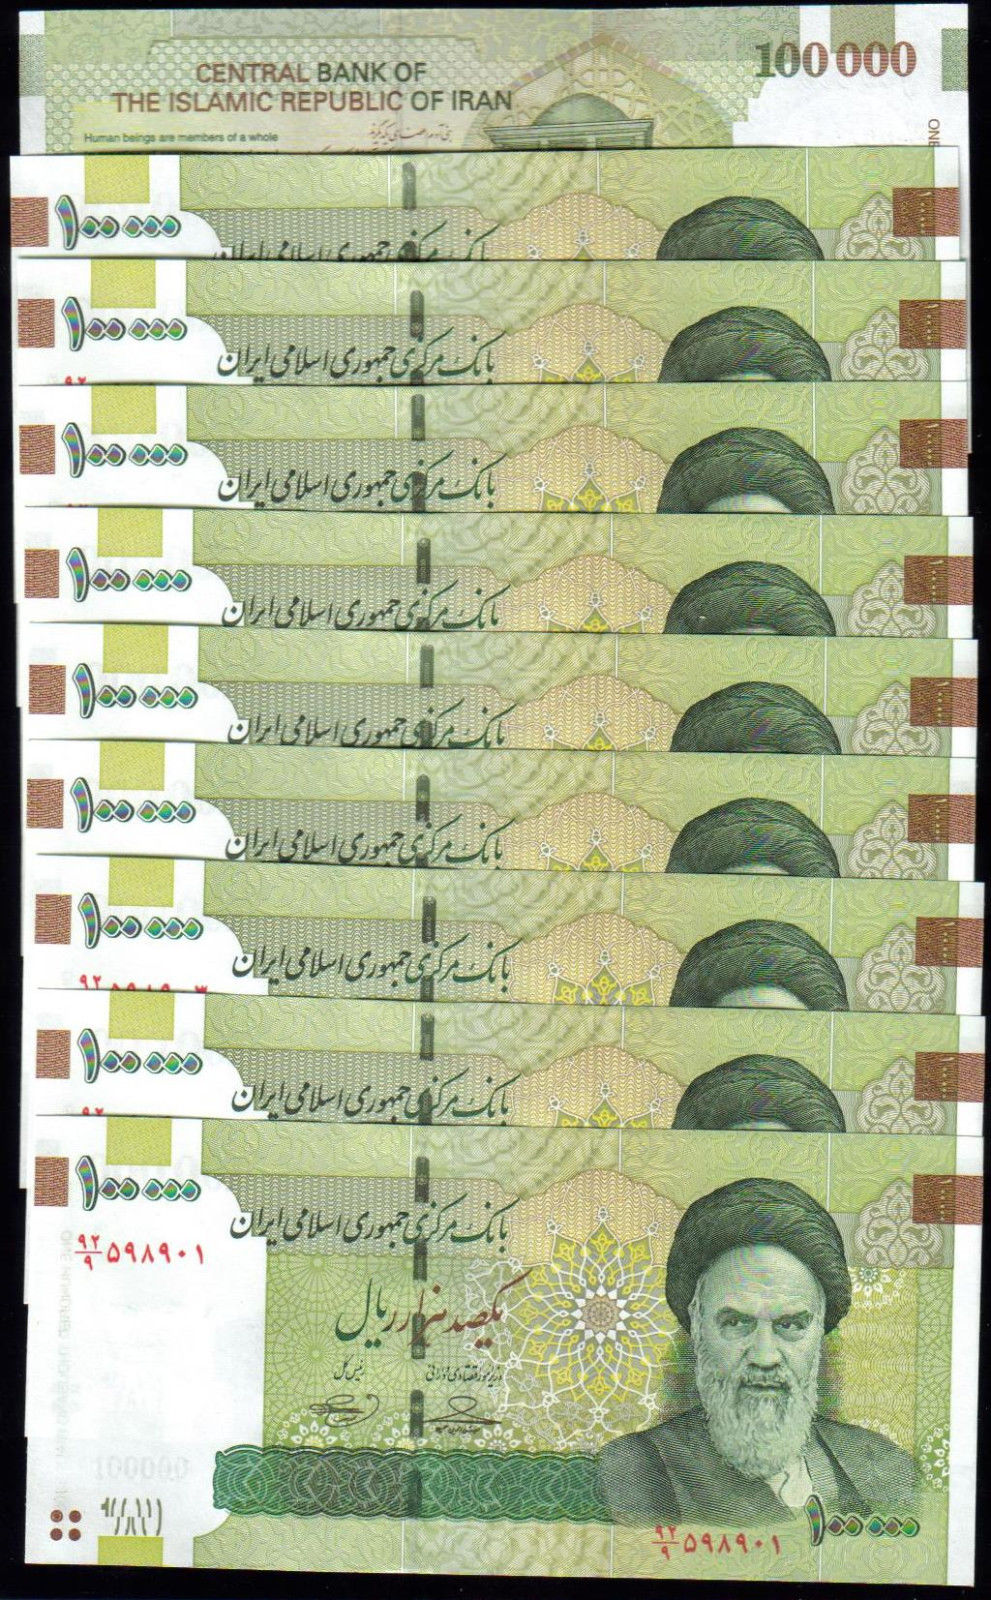 <font 120><font color=red><b>1,000,000 Iranian Rial, </font></b>One million Rial, UNC. This lot consists of 10 pieces of 100,000 Rial, a total of One Million Iranian Rial.